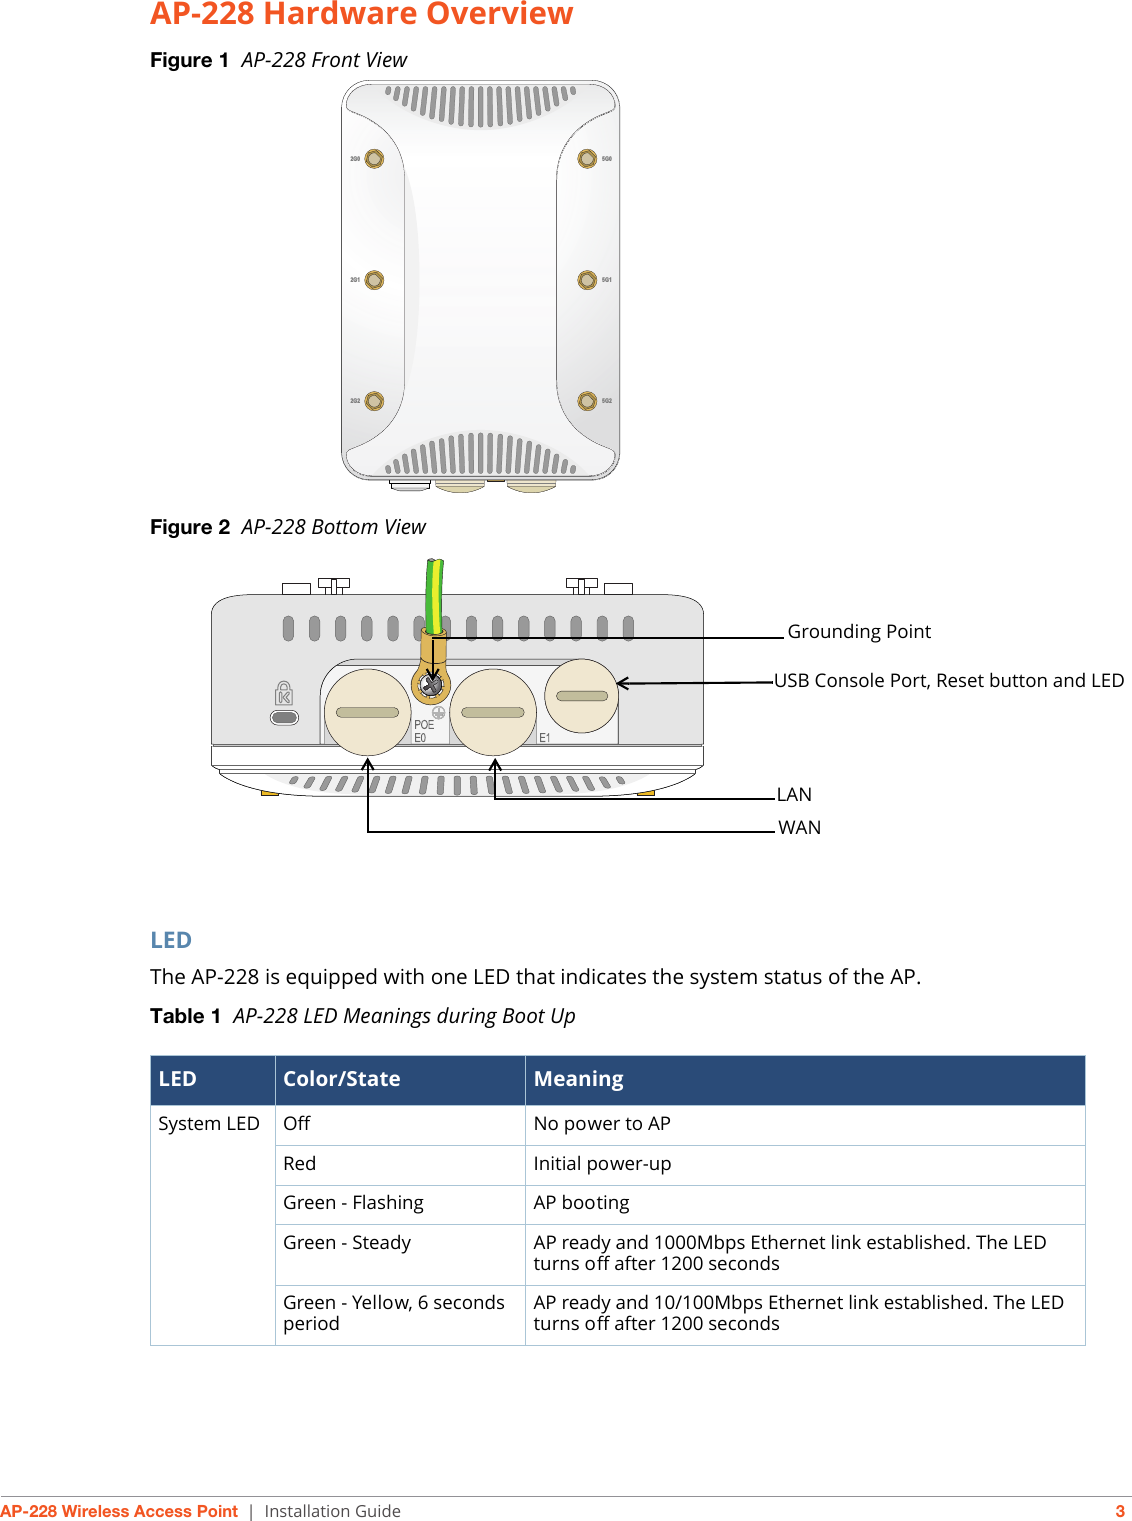 AP-228 Wireless Access Point | Installation Guide 3AP-228 Hardware OverviewFigure 1  AP-228 Front View Figure 2  AP-228 Bottom ViewLED The AP-228 is equipped with one LED that indicates the system status of the AP.Table 1  AP-228 LED Meanings during Boot UpLED Color/State MeaningSystem LED Off No power to APRed Initial power-up Green - Flashing AP bootingGreen - Steady AP ready and 1000Mbps Ethernet link established. The LED turns off after 1200 secondsGreen - Yellow, 6 seconds period AP ready and 10/100Mbps Ethernet link established. The LED turns off after 1200 seconds2G02G12G25G05G15G2LANWANGrounding PointUSB Console Port, Reset button and LED